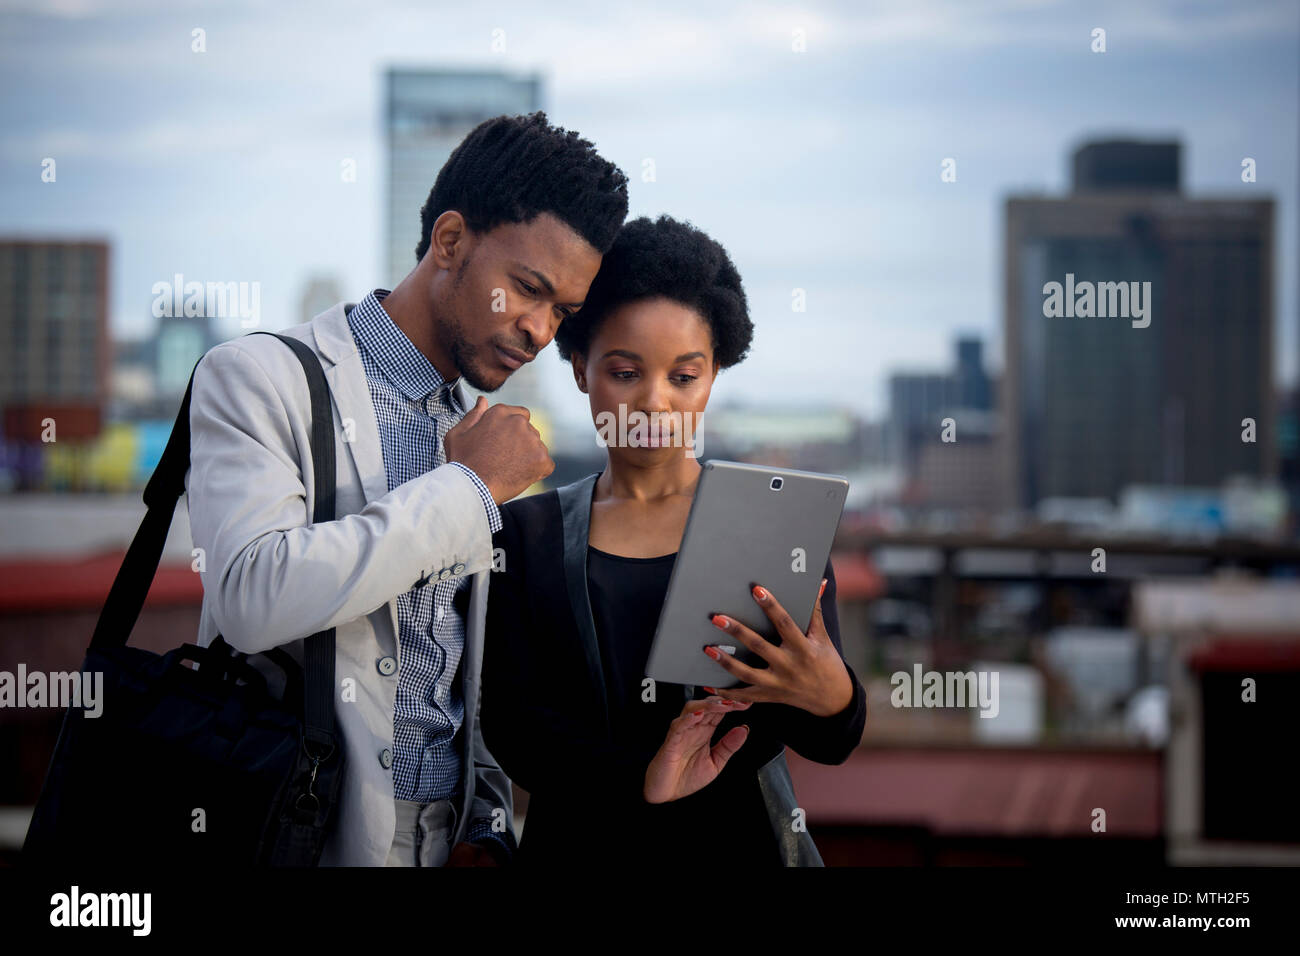 business man and woman looking at tablet Stock Photo